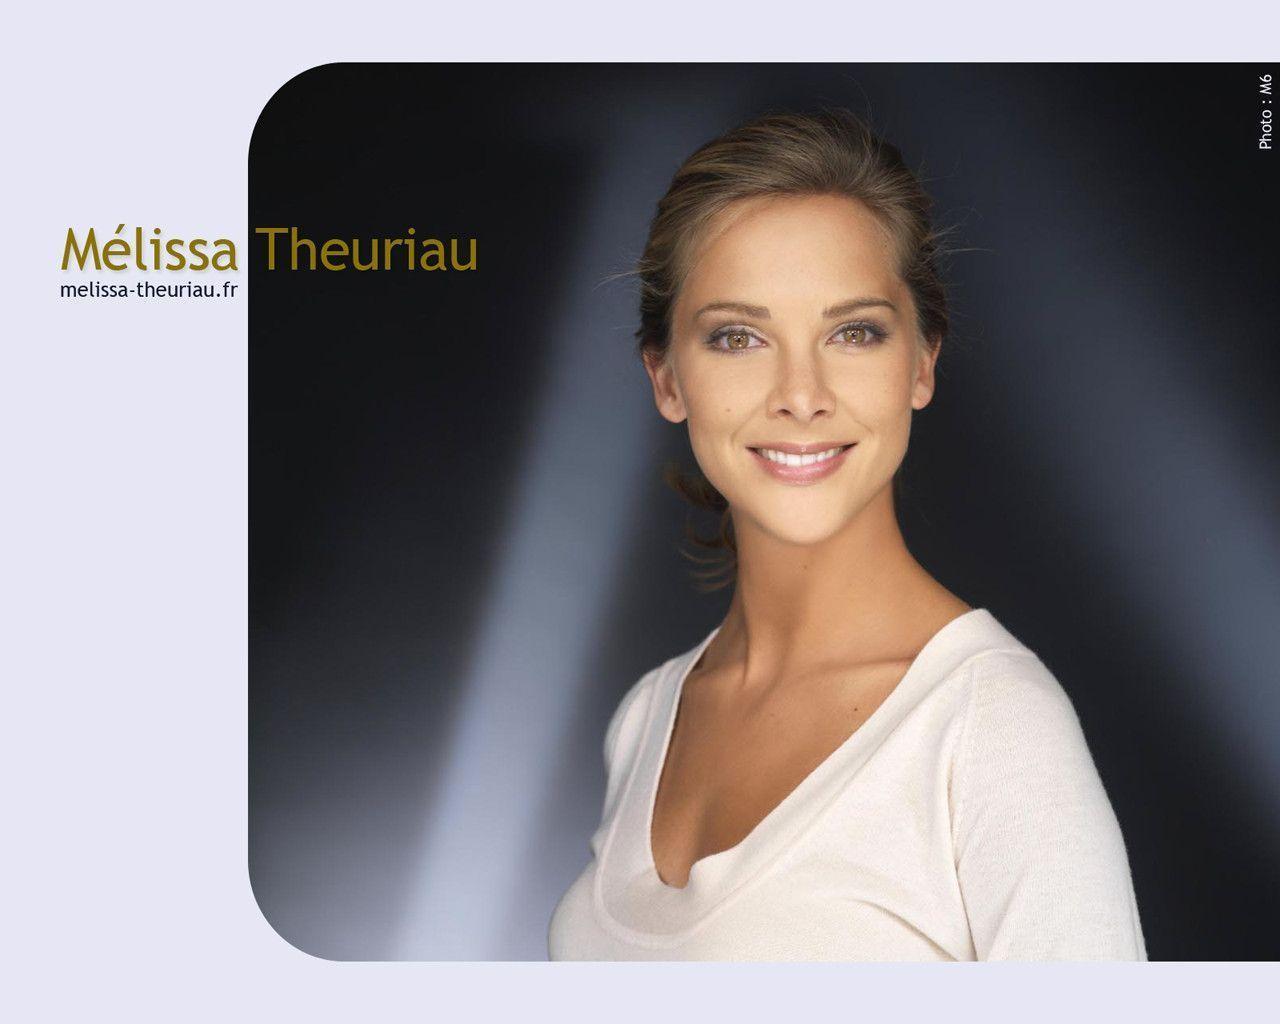 image For > Melissa Theuriau